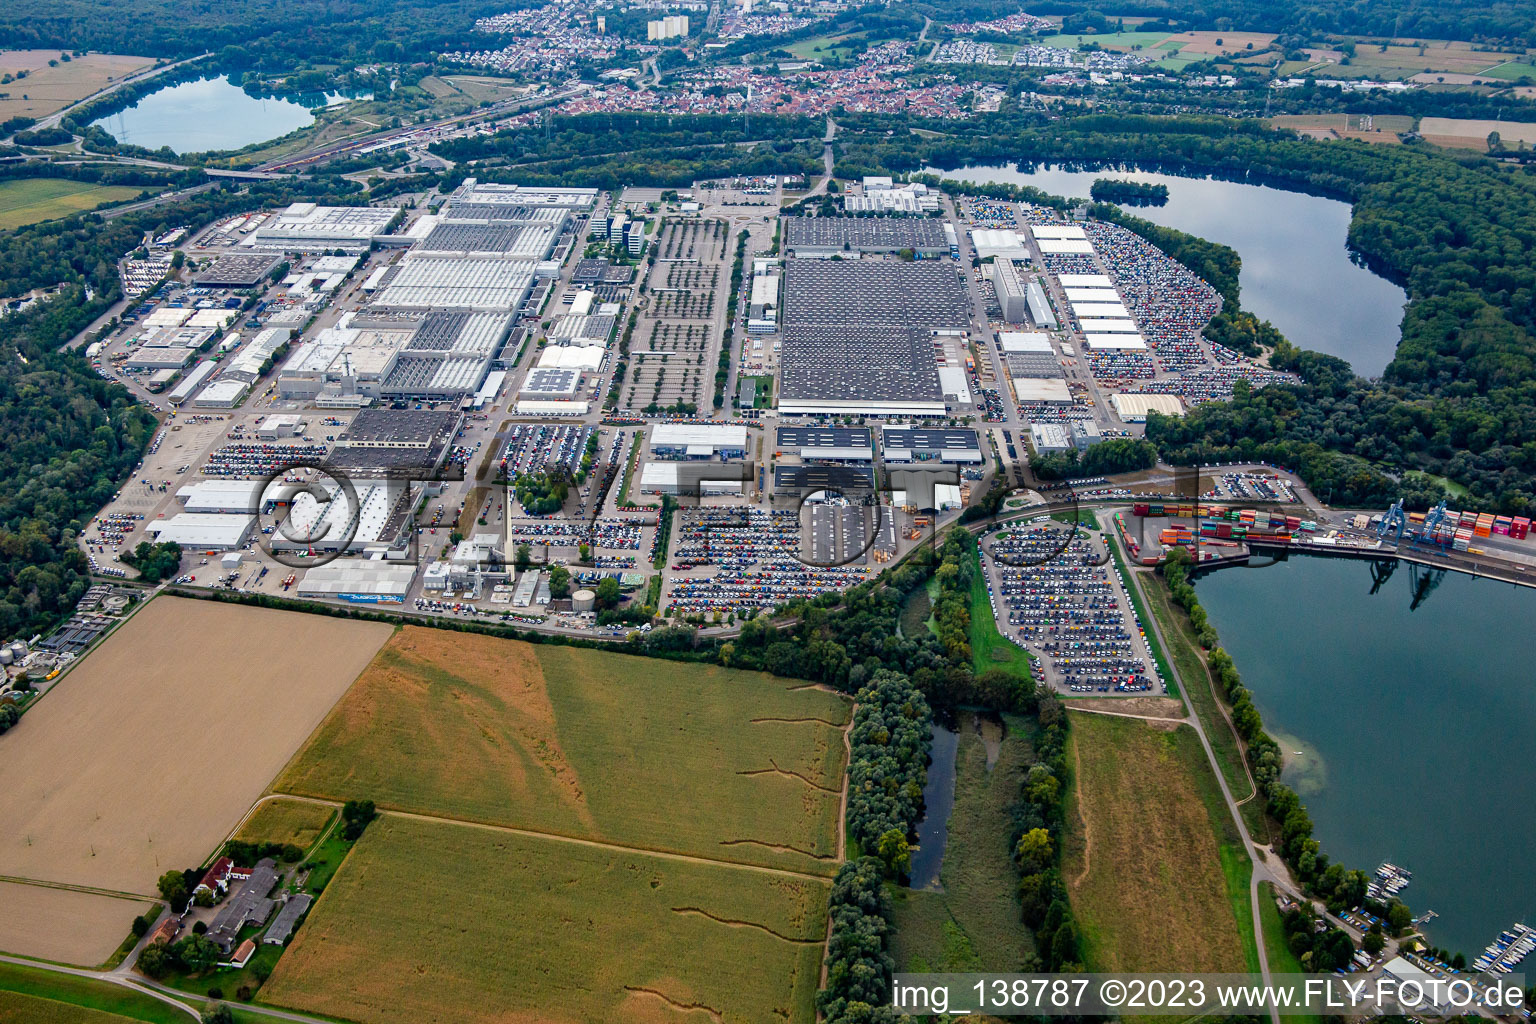 Aerial view of Daimler Truck AG, Mercedes-Benz Wörth plant in the Wörth automobile plant in the district Maximiliansau in Wörth am Rhein in the state Rhineland-Palatinate, Germany